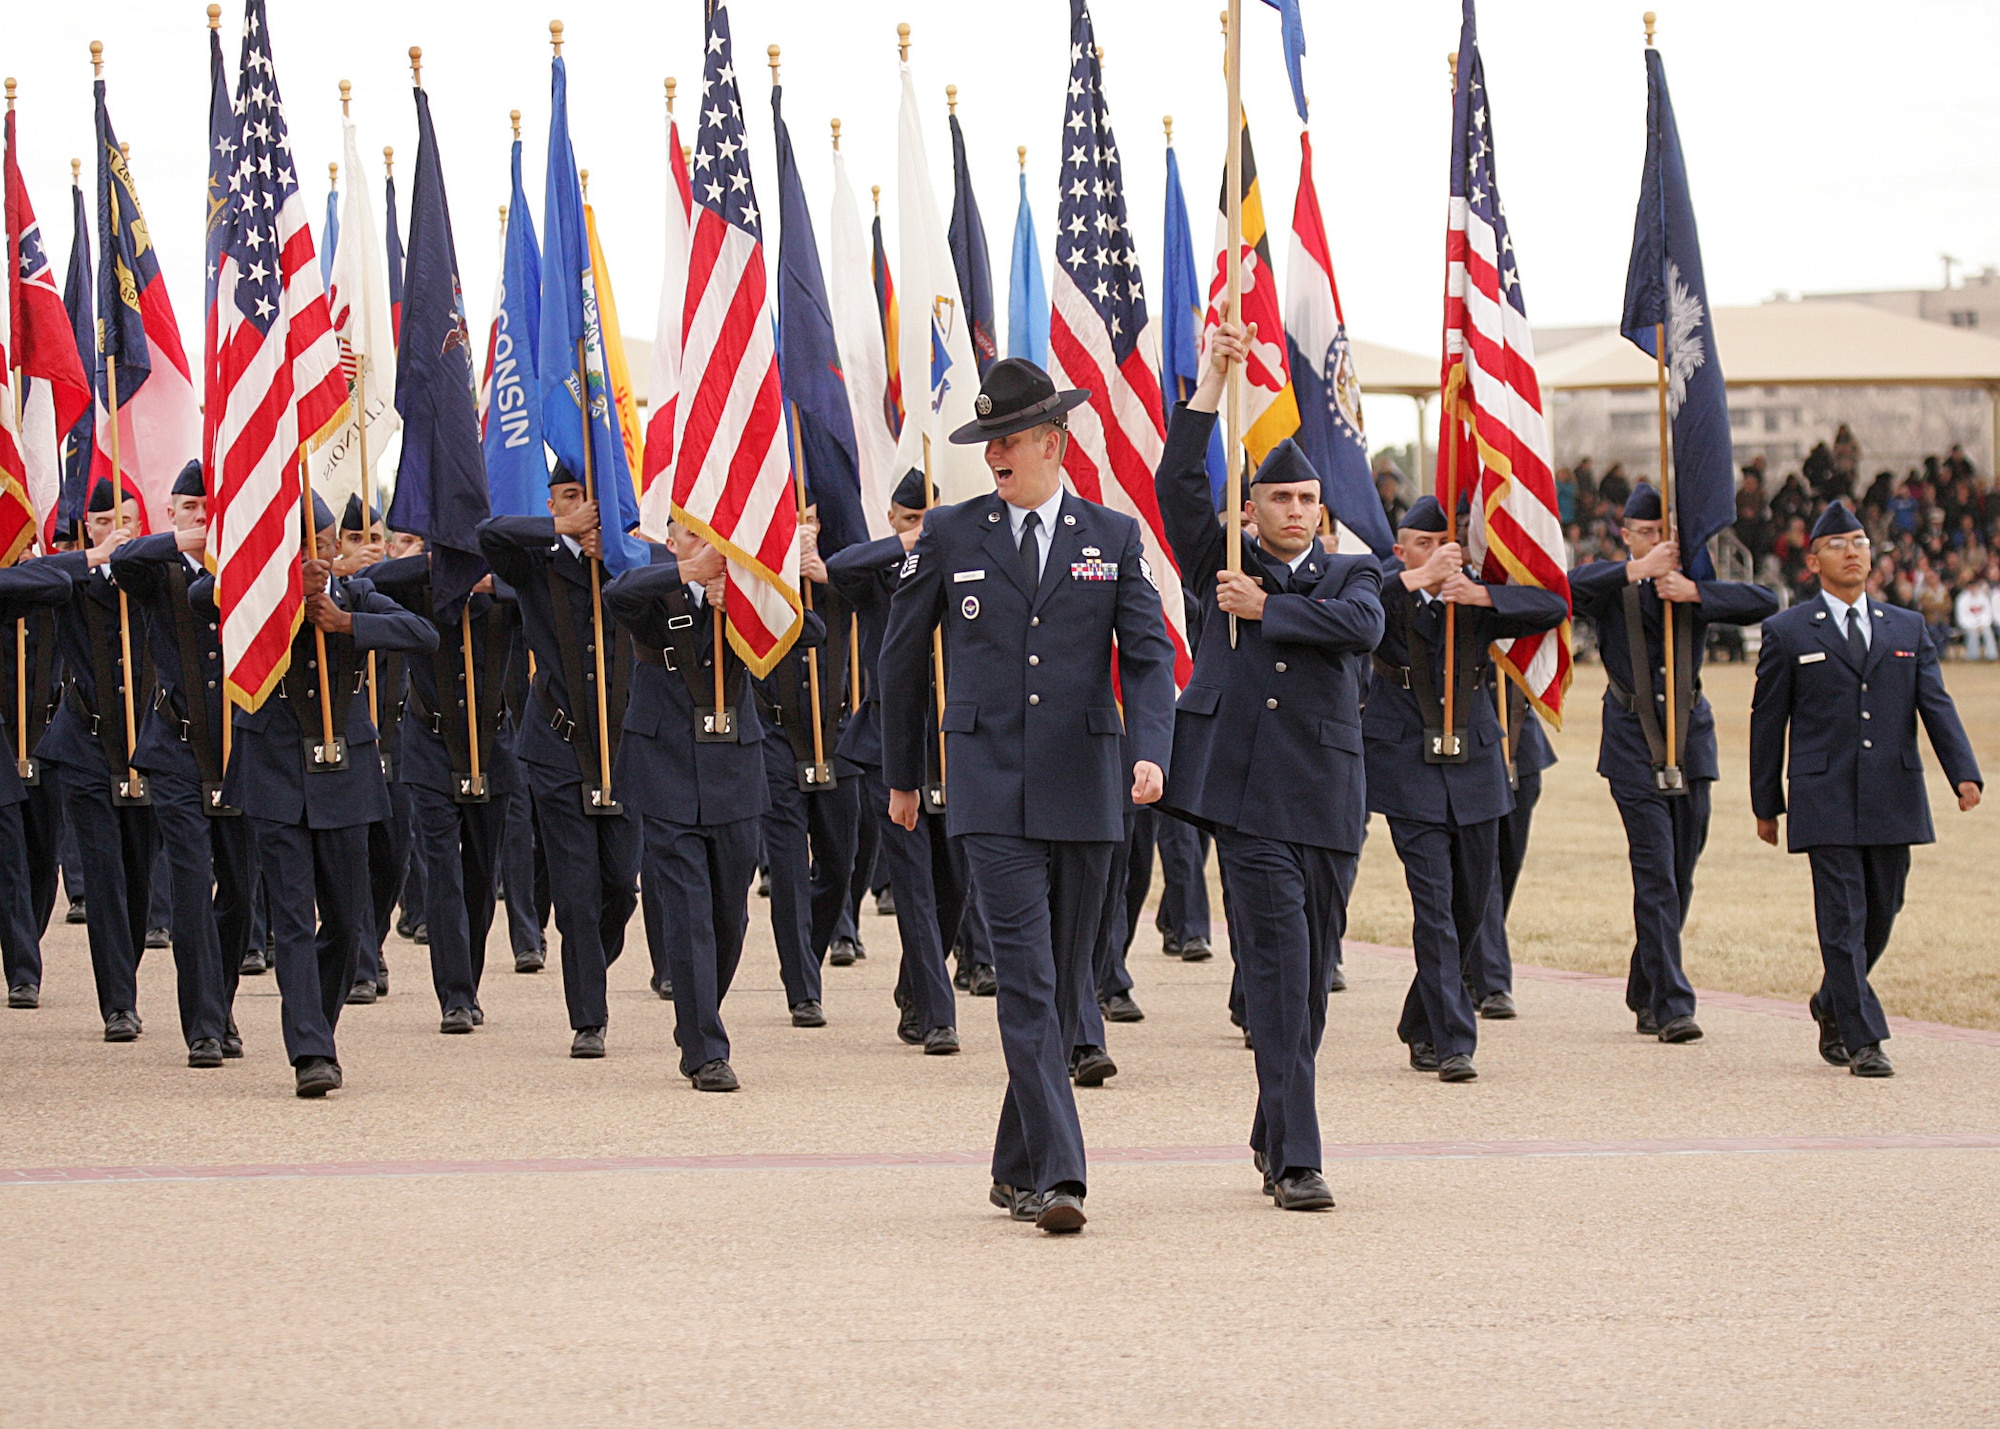 Staff Sgt. Kenneth Dancer, a military training instructor with the 321st Training Squadron, leads a group of Air Force basic military trainees carrying state flags during the BMT graduation ceremony at Lackland Air Force Base Jan. 7. MTIs mold recruits through an eight-and-a-half week BMT program focusing on basic war skills, military bearing, discipline, physical fitness, drill and ceremonies and Air Force core values. (U.S. Air Force photo/Robbin Cresswell)